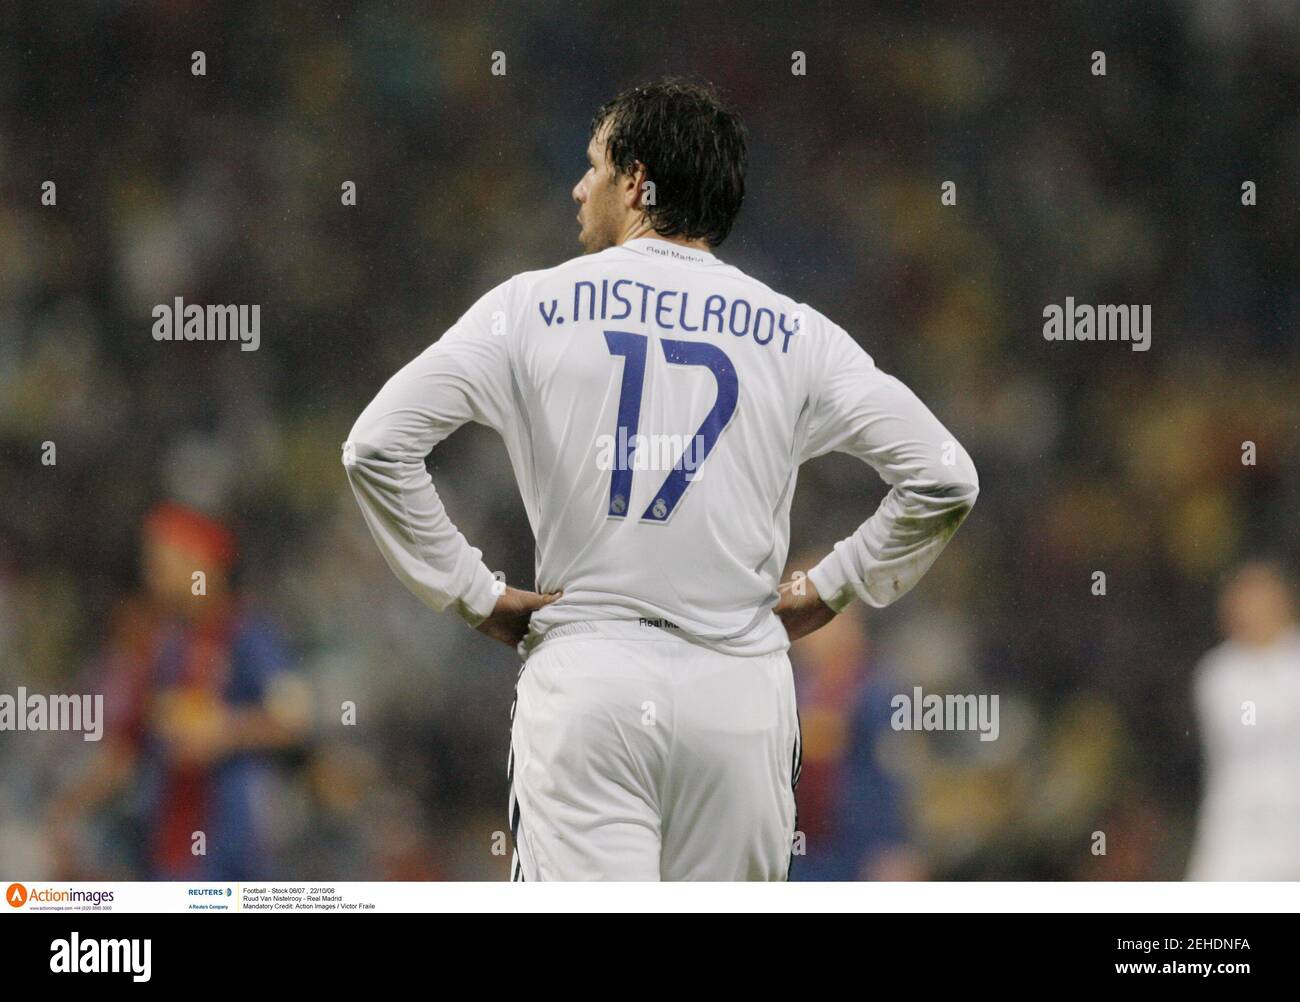 Football - Stock 06/07 , 22/10/06 Ruud Van Nistelrooy - Real Madrid  Mandatory Credit: Action Images / Victor Fraile Stock Photo - Alamy